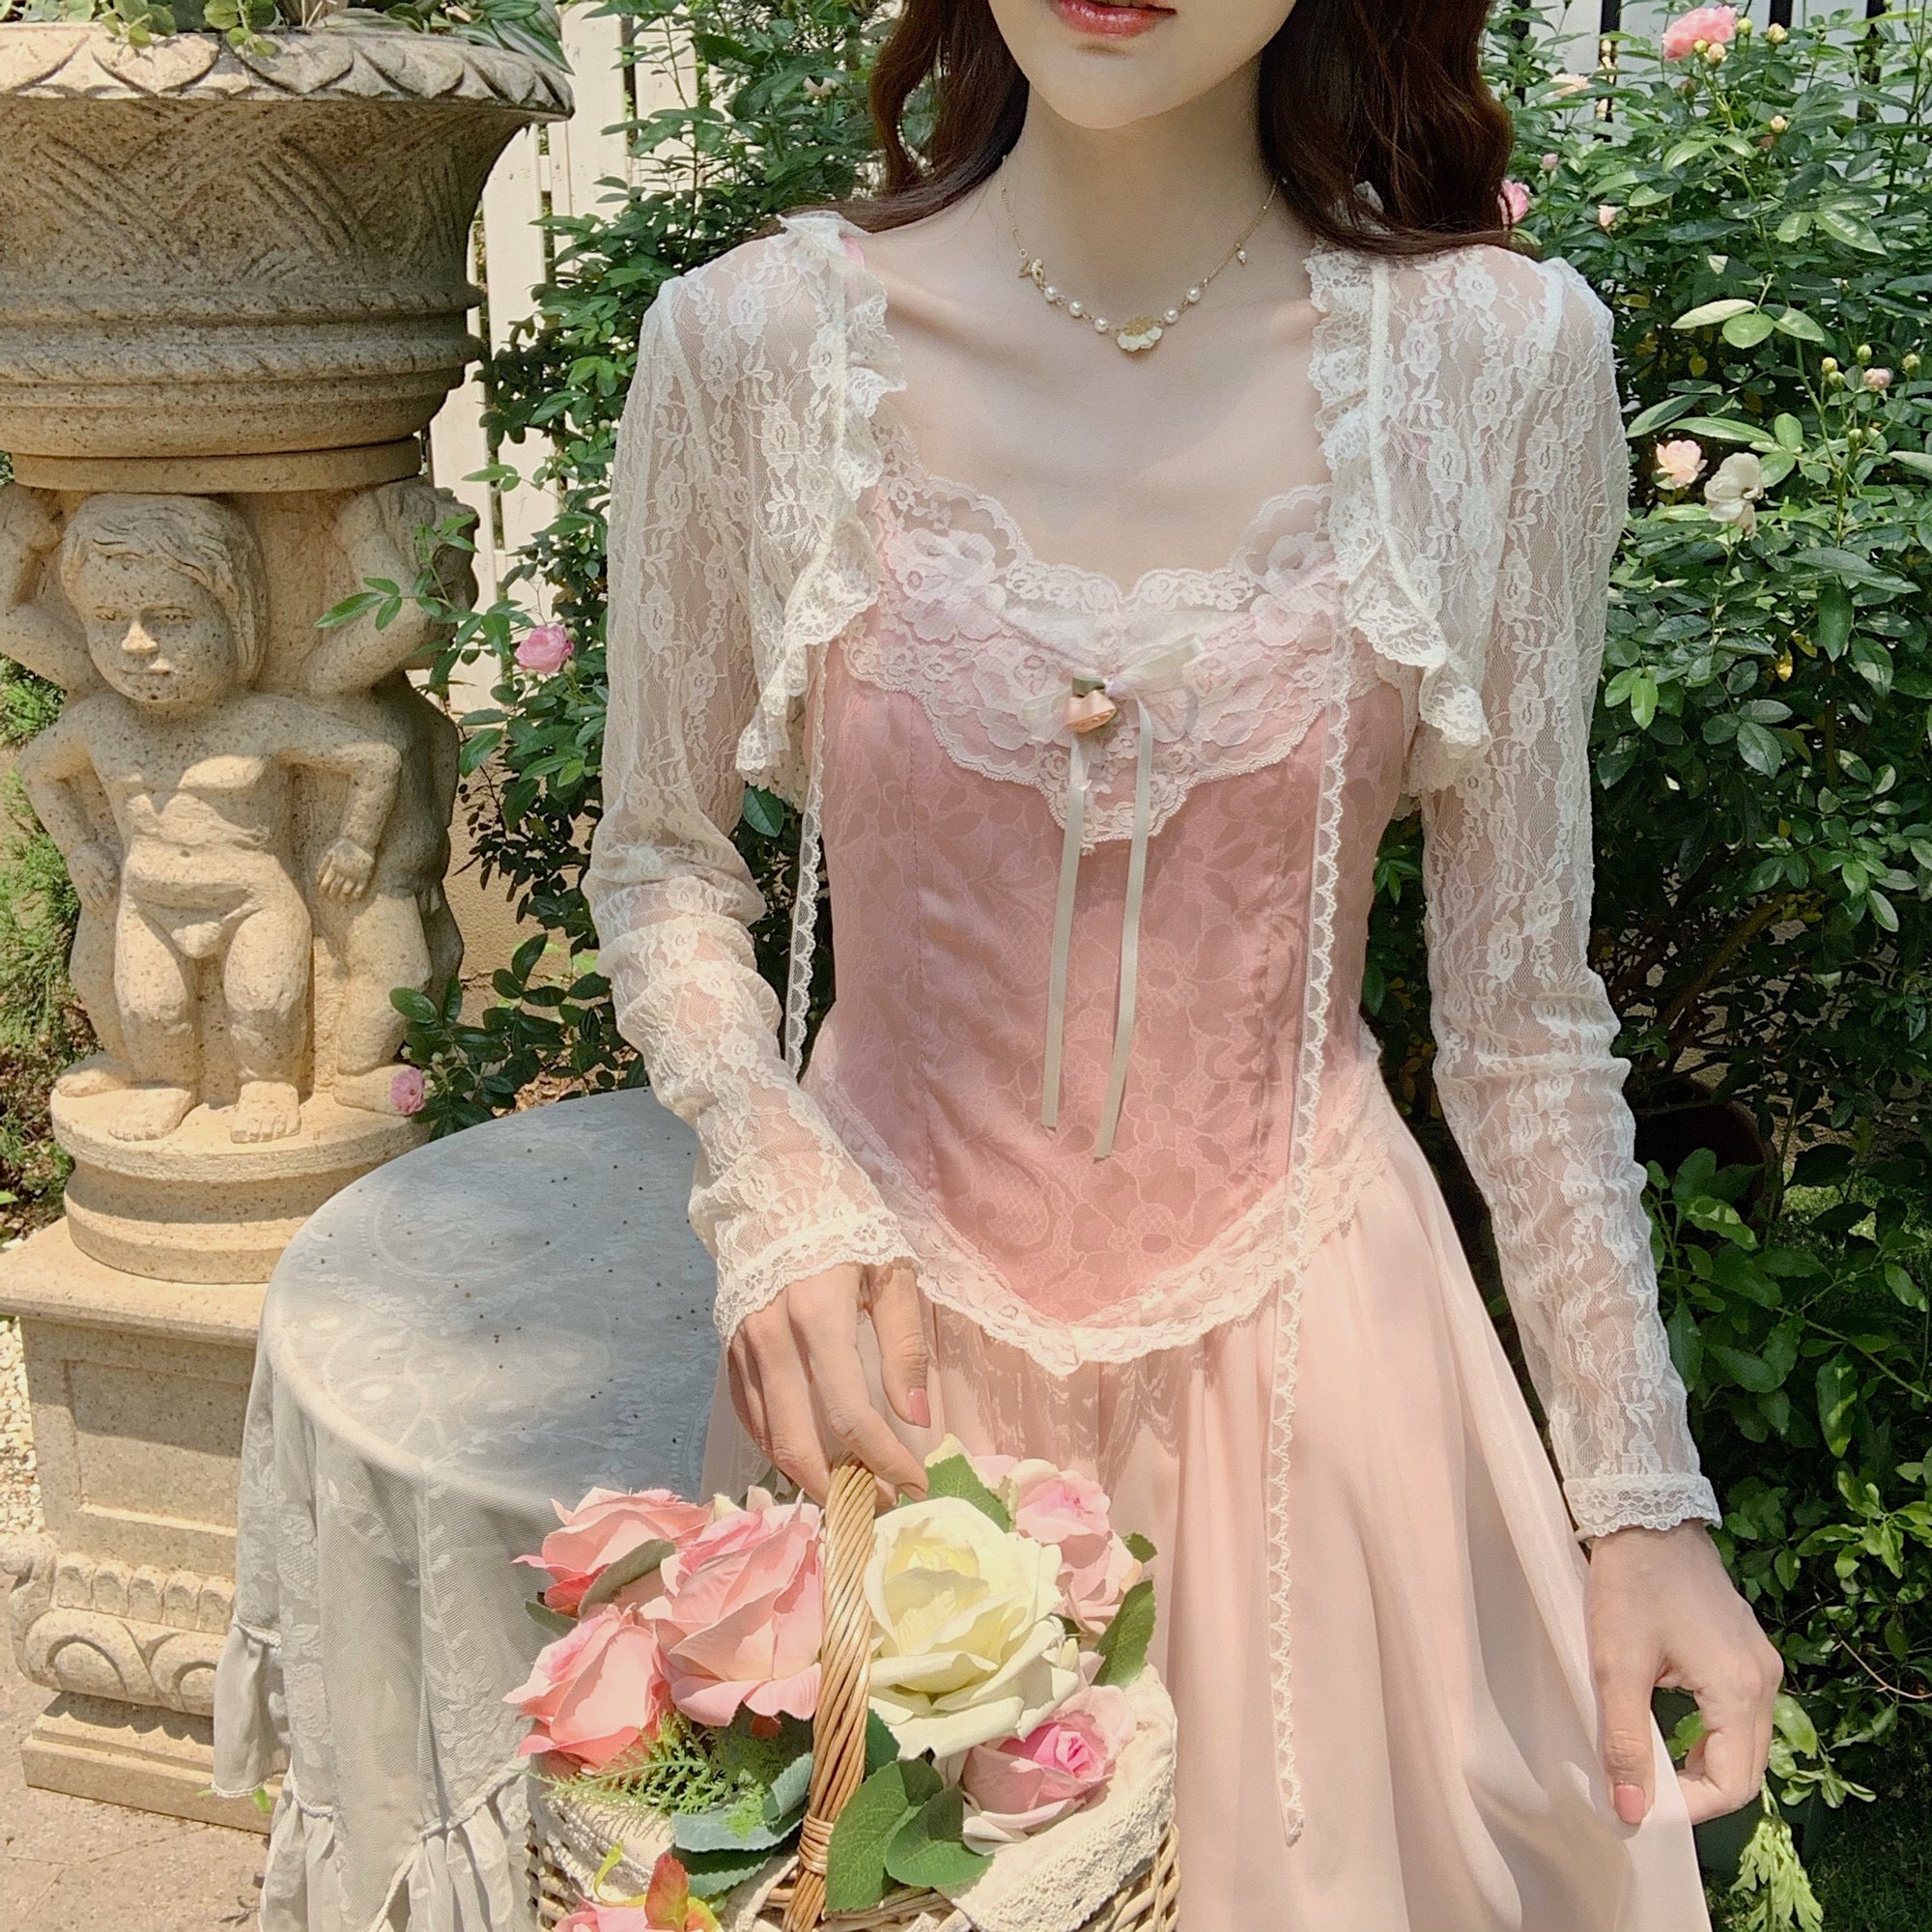 Pink “Princess” corset dress with french lace decoration featured